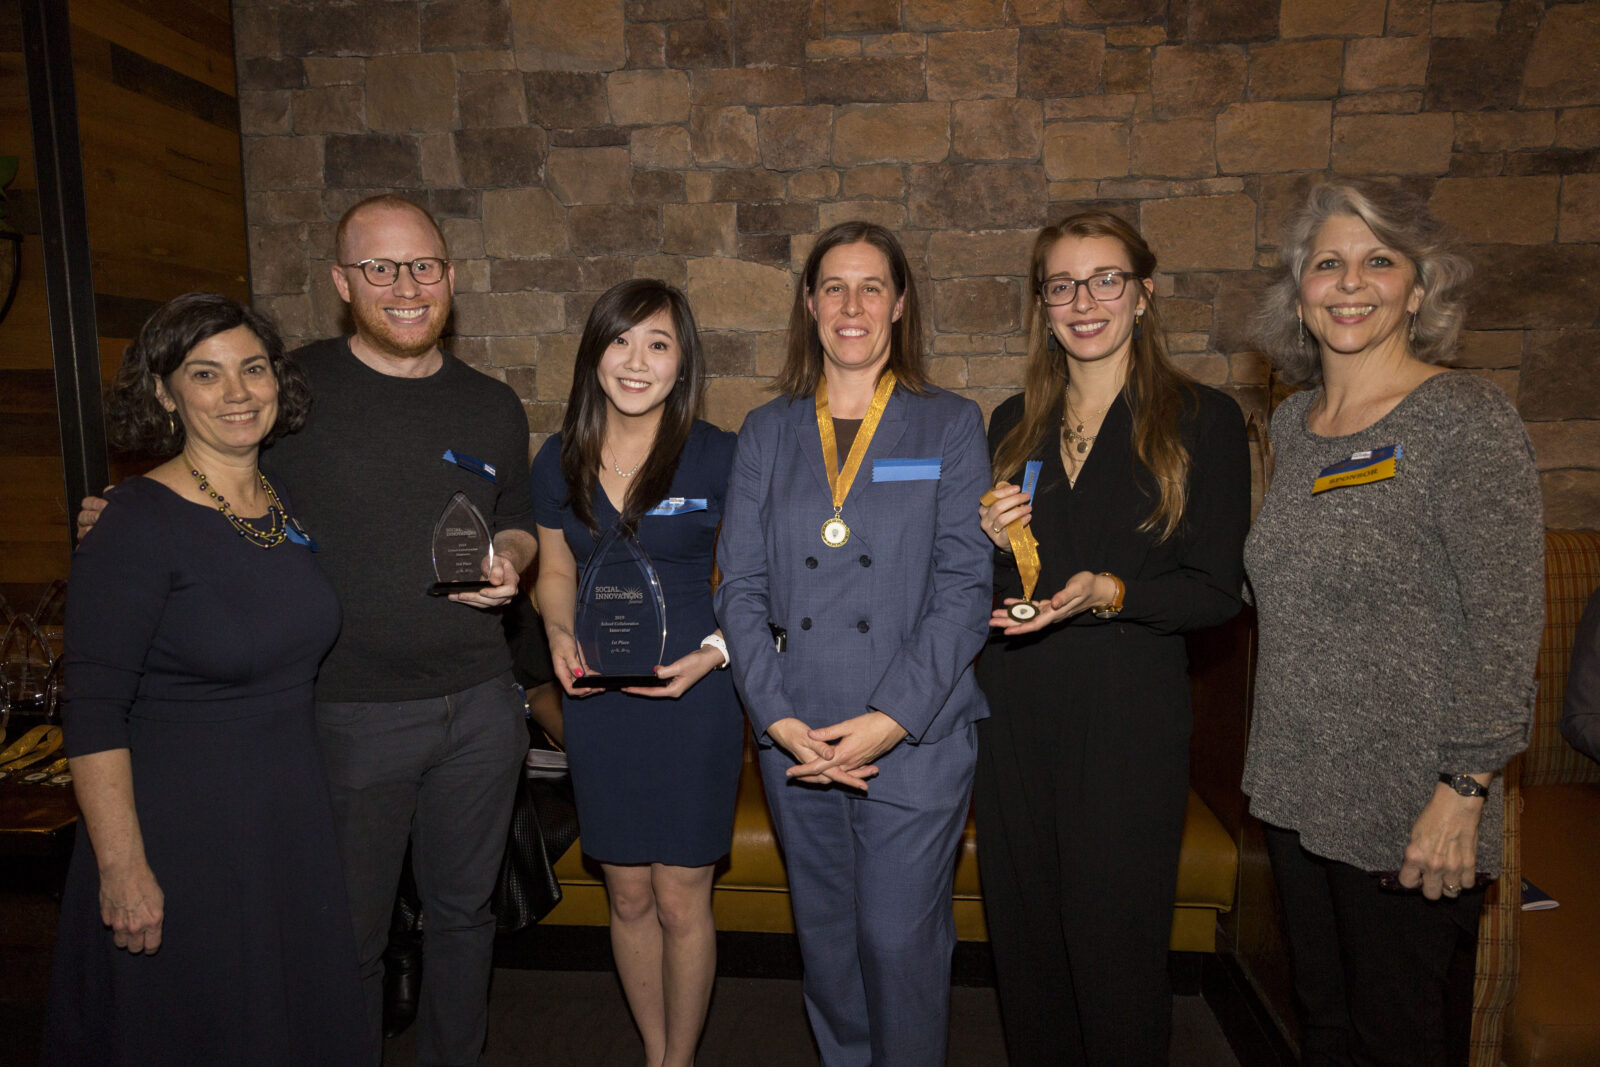 Tiffany Yau (third from left), 2019 winner of the Greater Philadelphia Social Innovation Award in the School Collaboration category